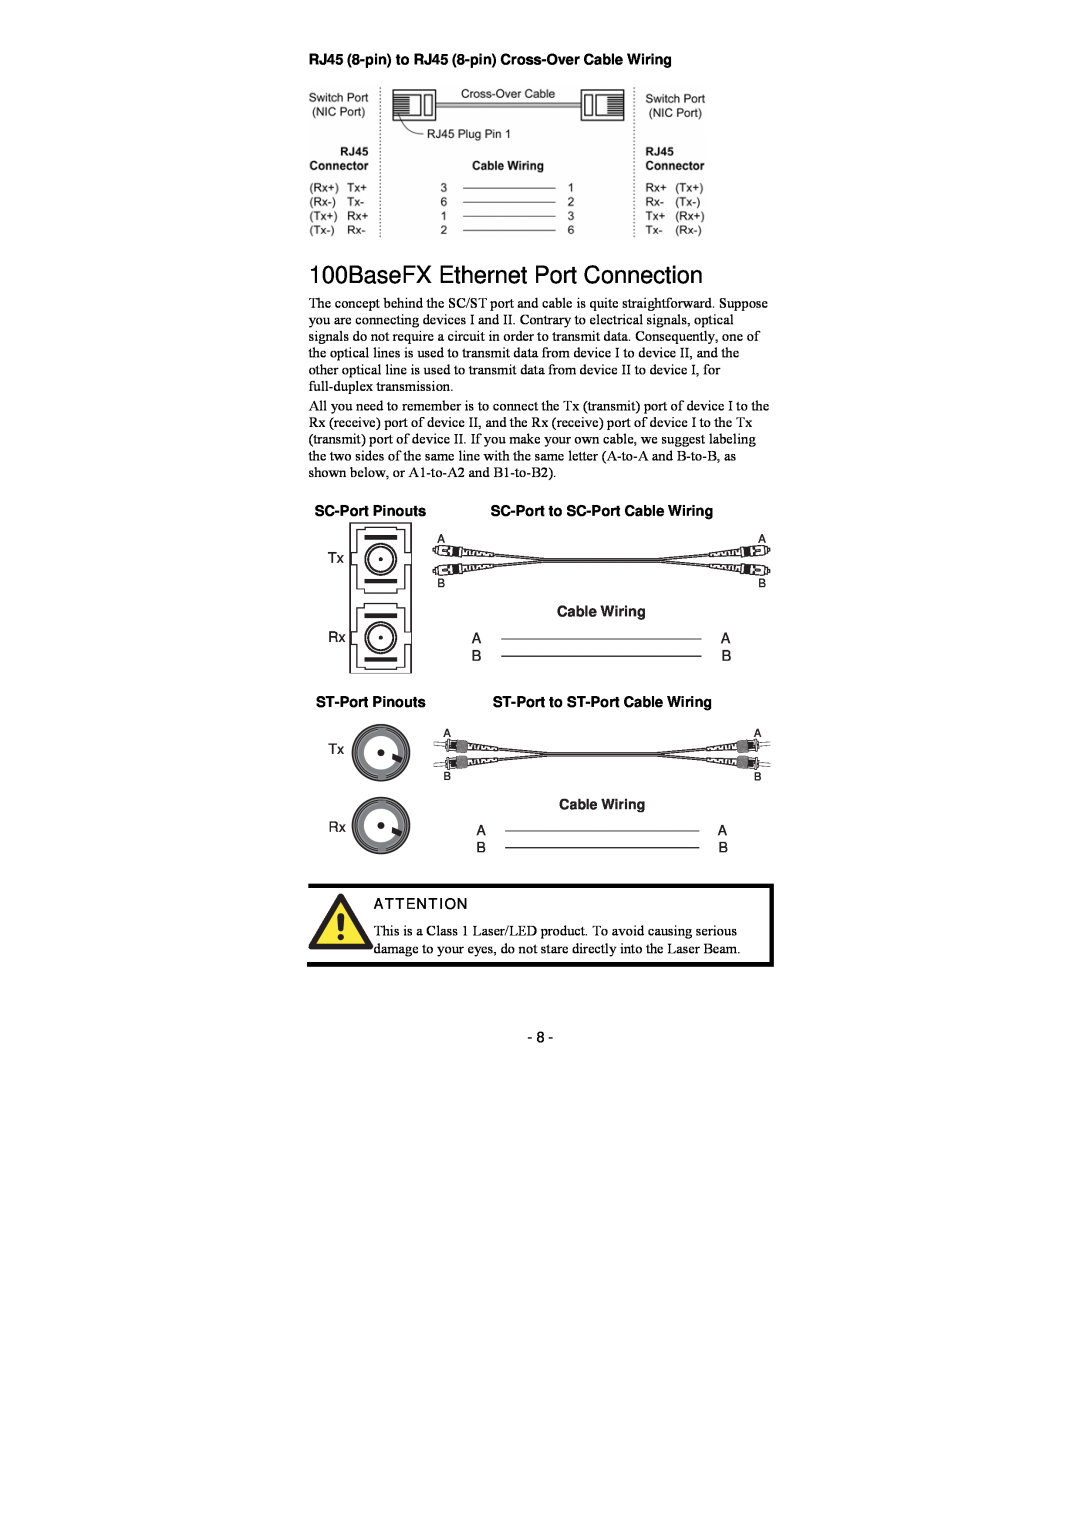 Moxa Technologies EDS-208 100BaseFX Ethernet Port Connection, RJ45 8-pin to RJ45 8-pin Cross-Over Cable Wiring, Tx Rx 